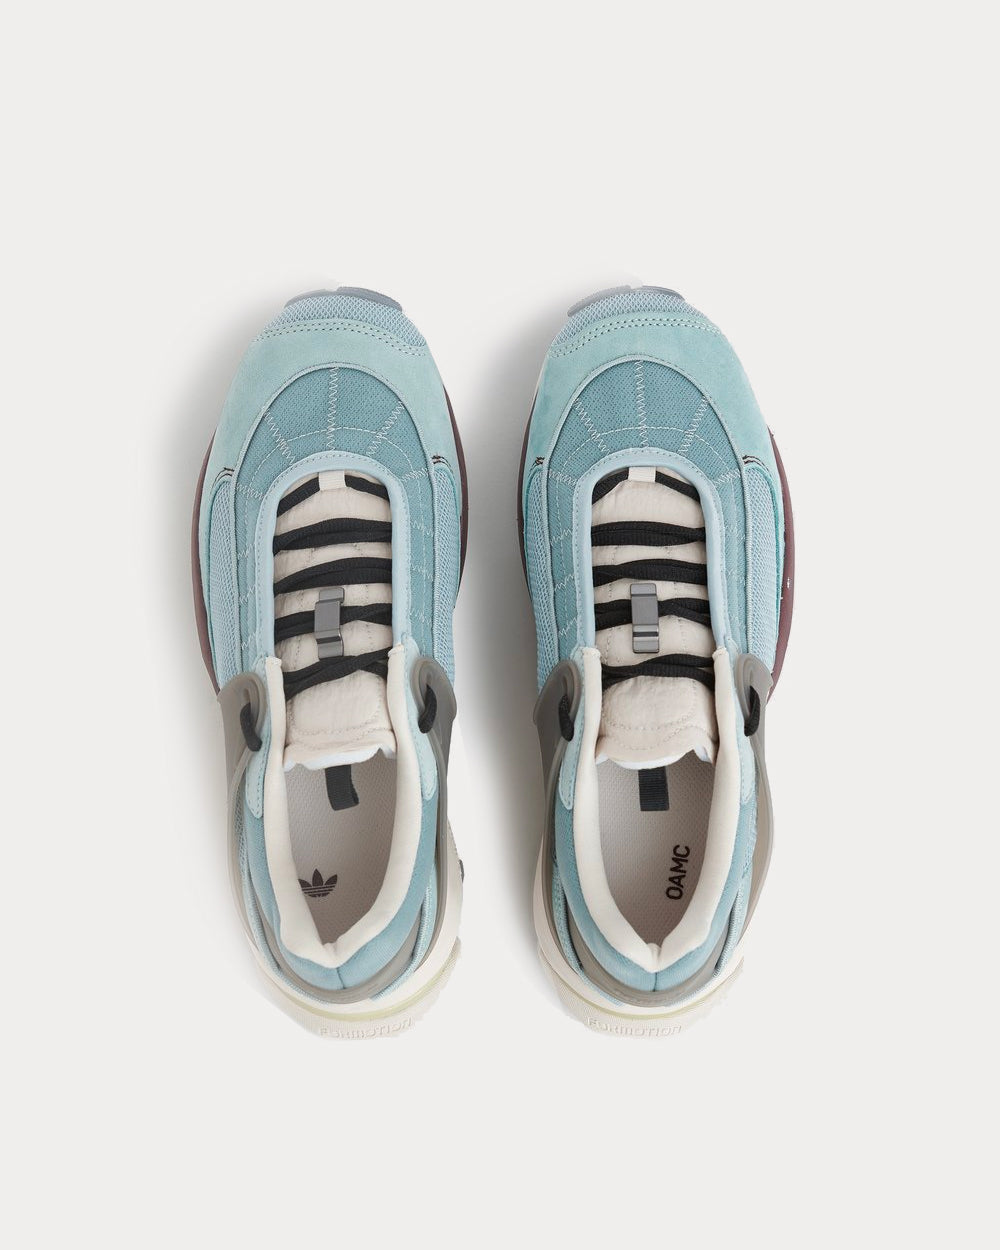 Adidas x OAMC - TYPE O-5 Blue Mist Low Top Sneakers